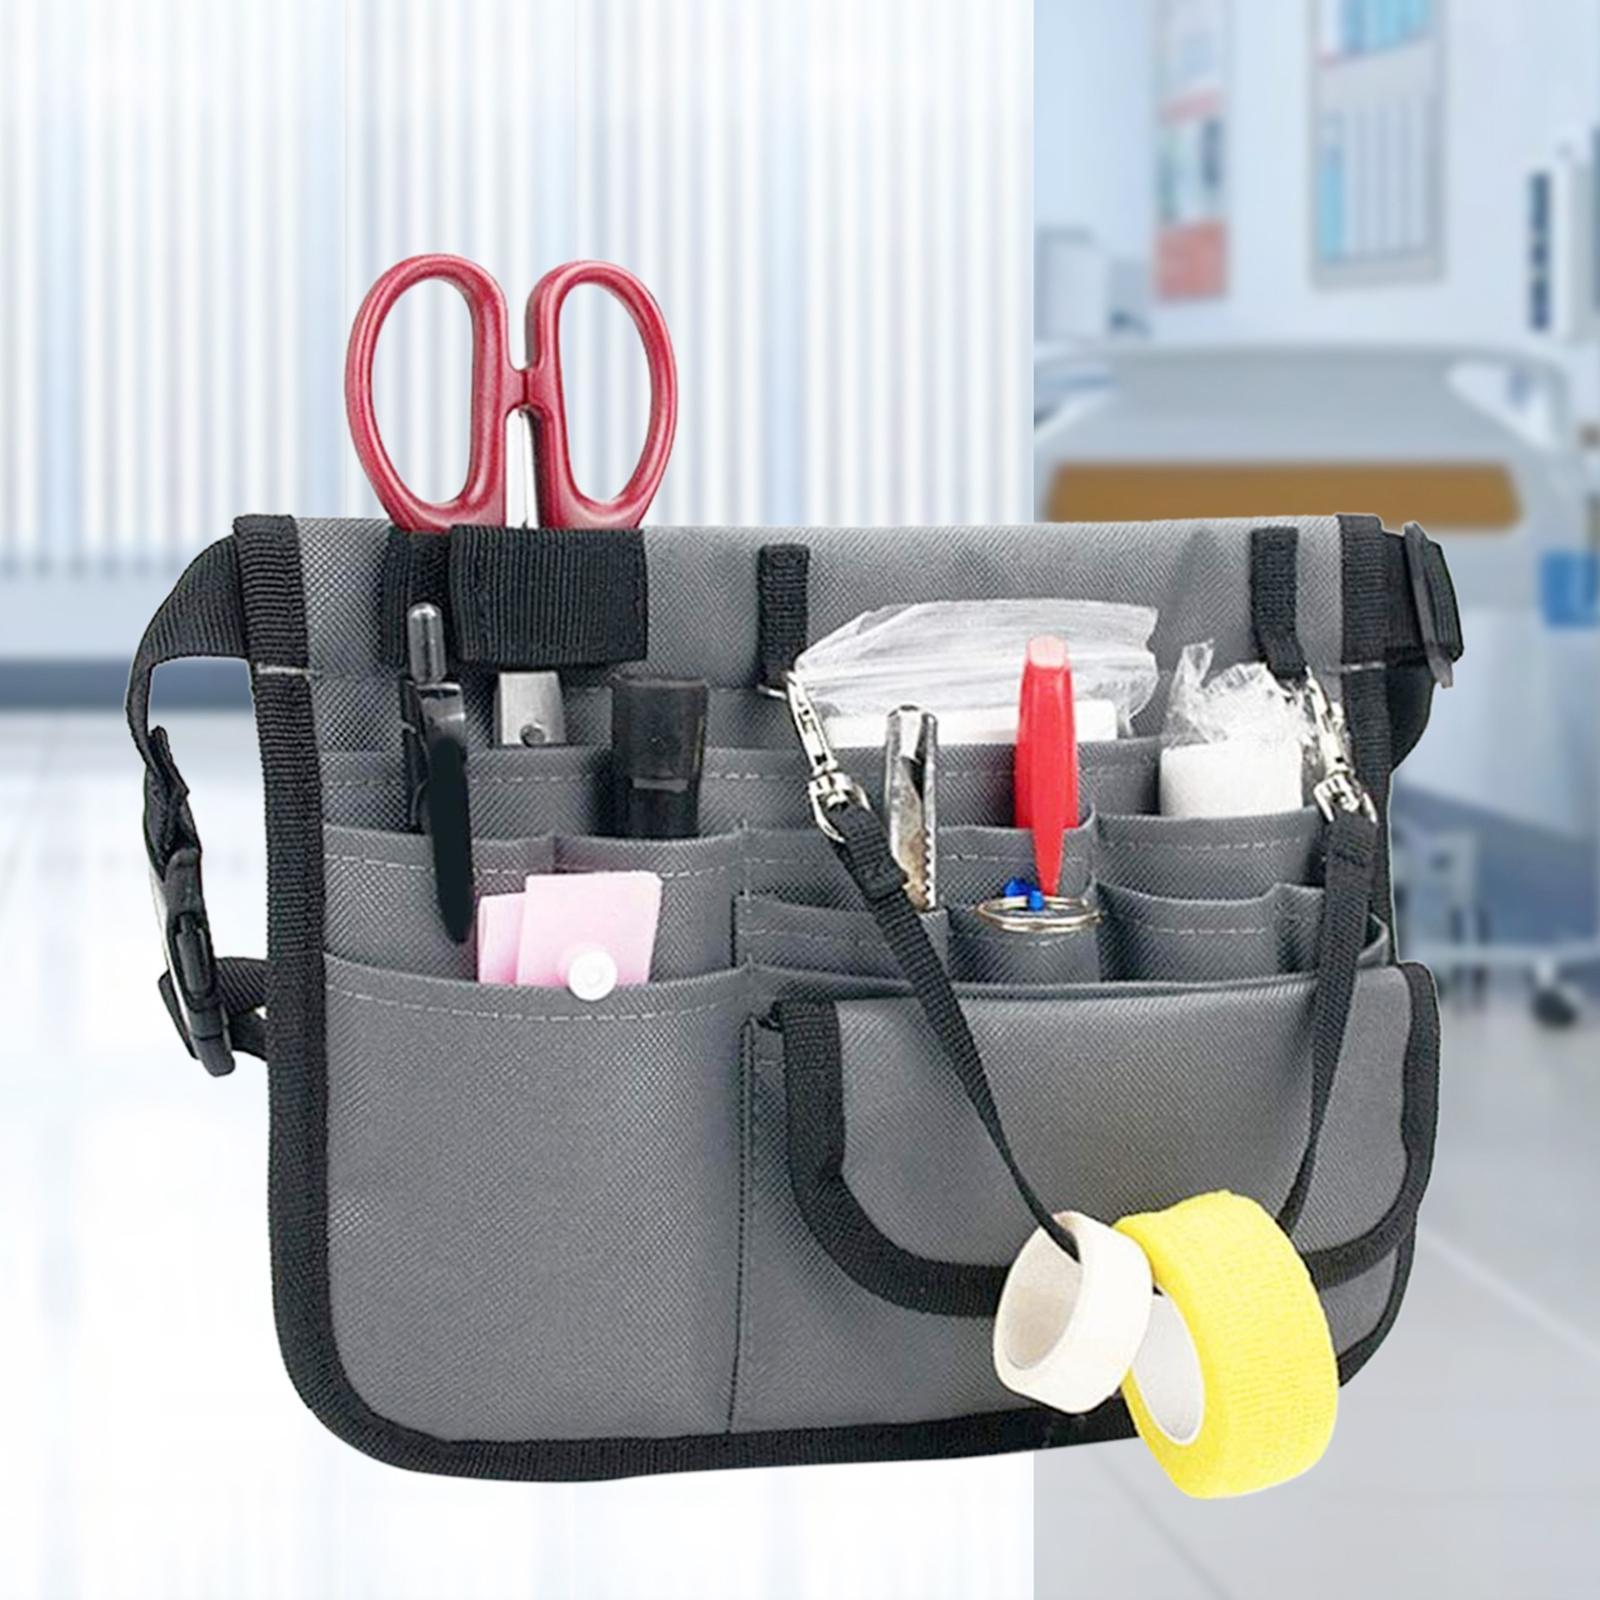 Nurse Fanny Pack Pocket Accessories Multi Compartment (Tools Not Included) for Indoor